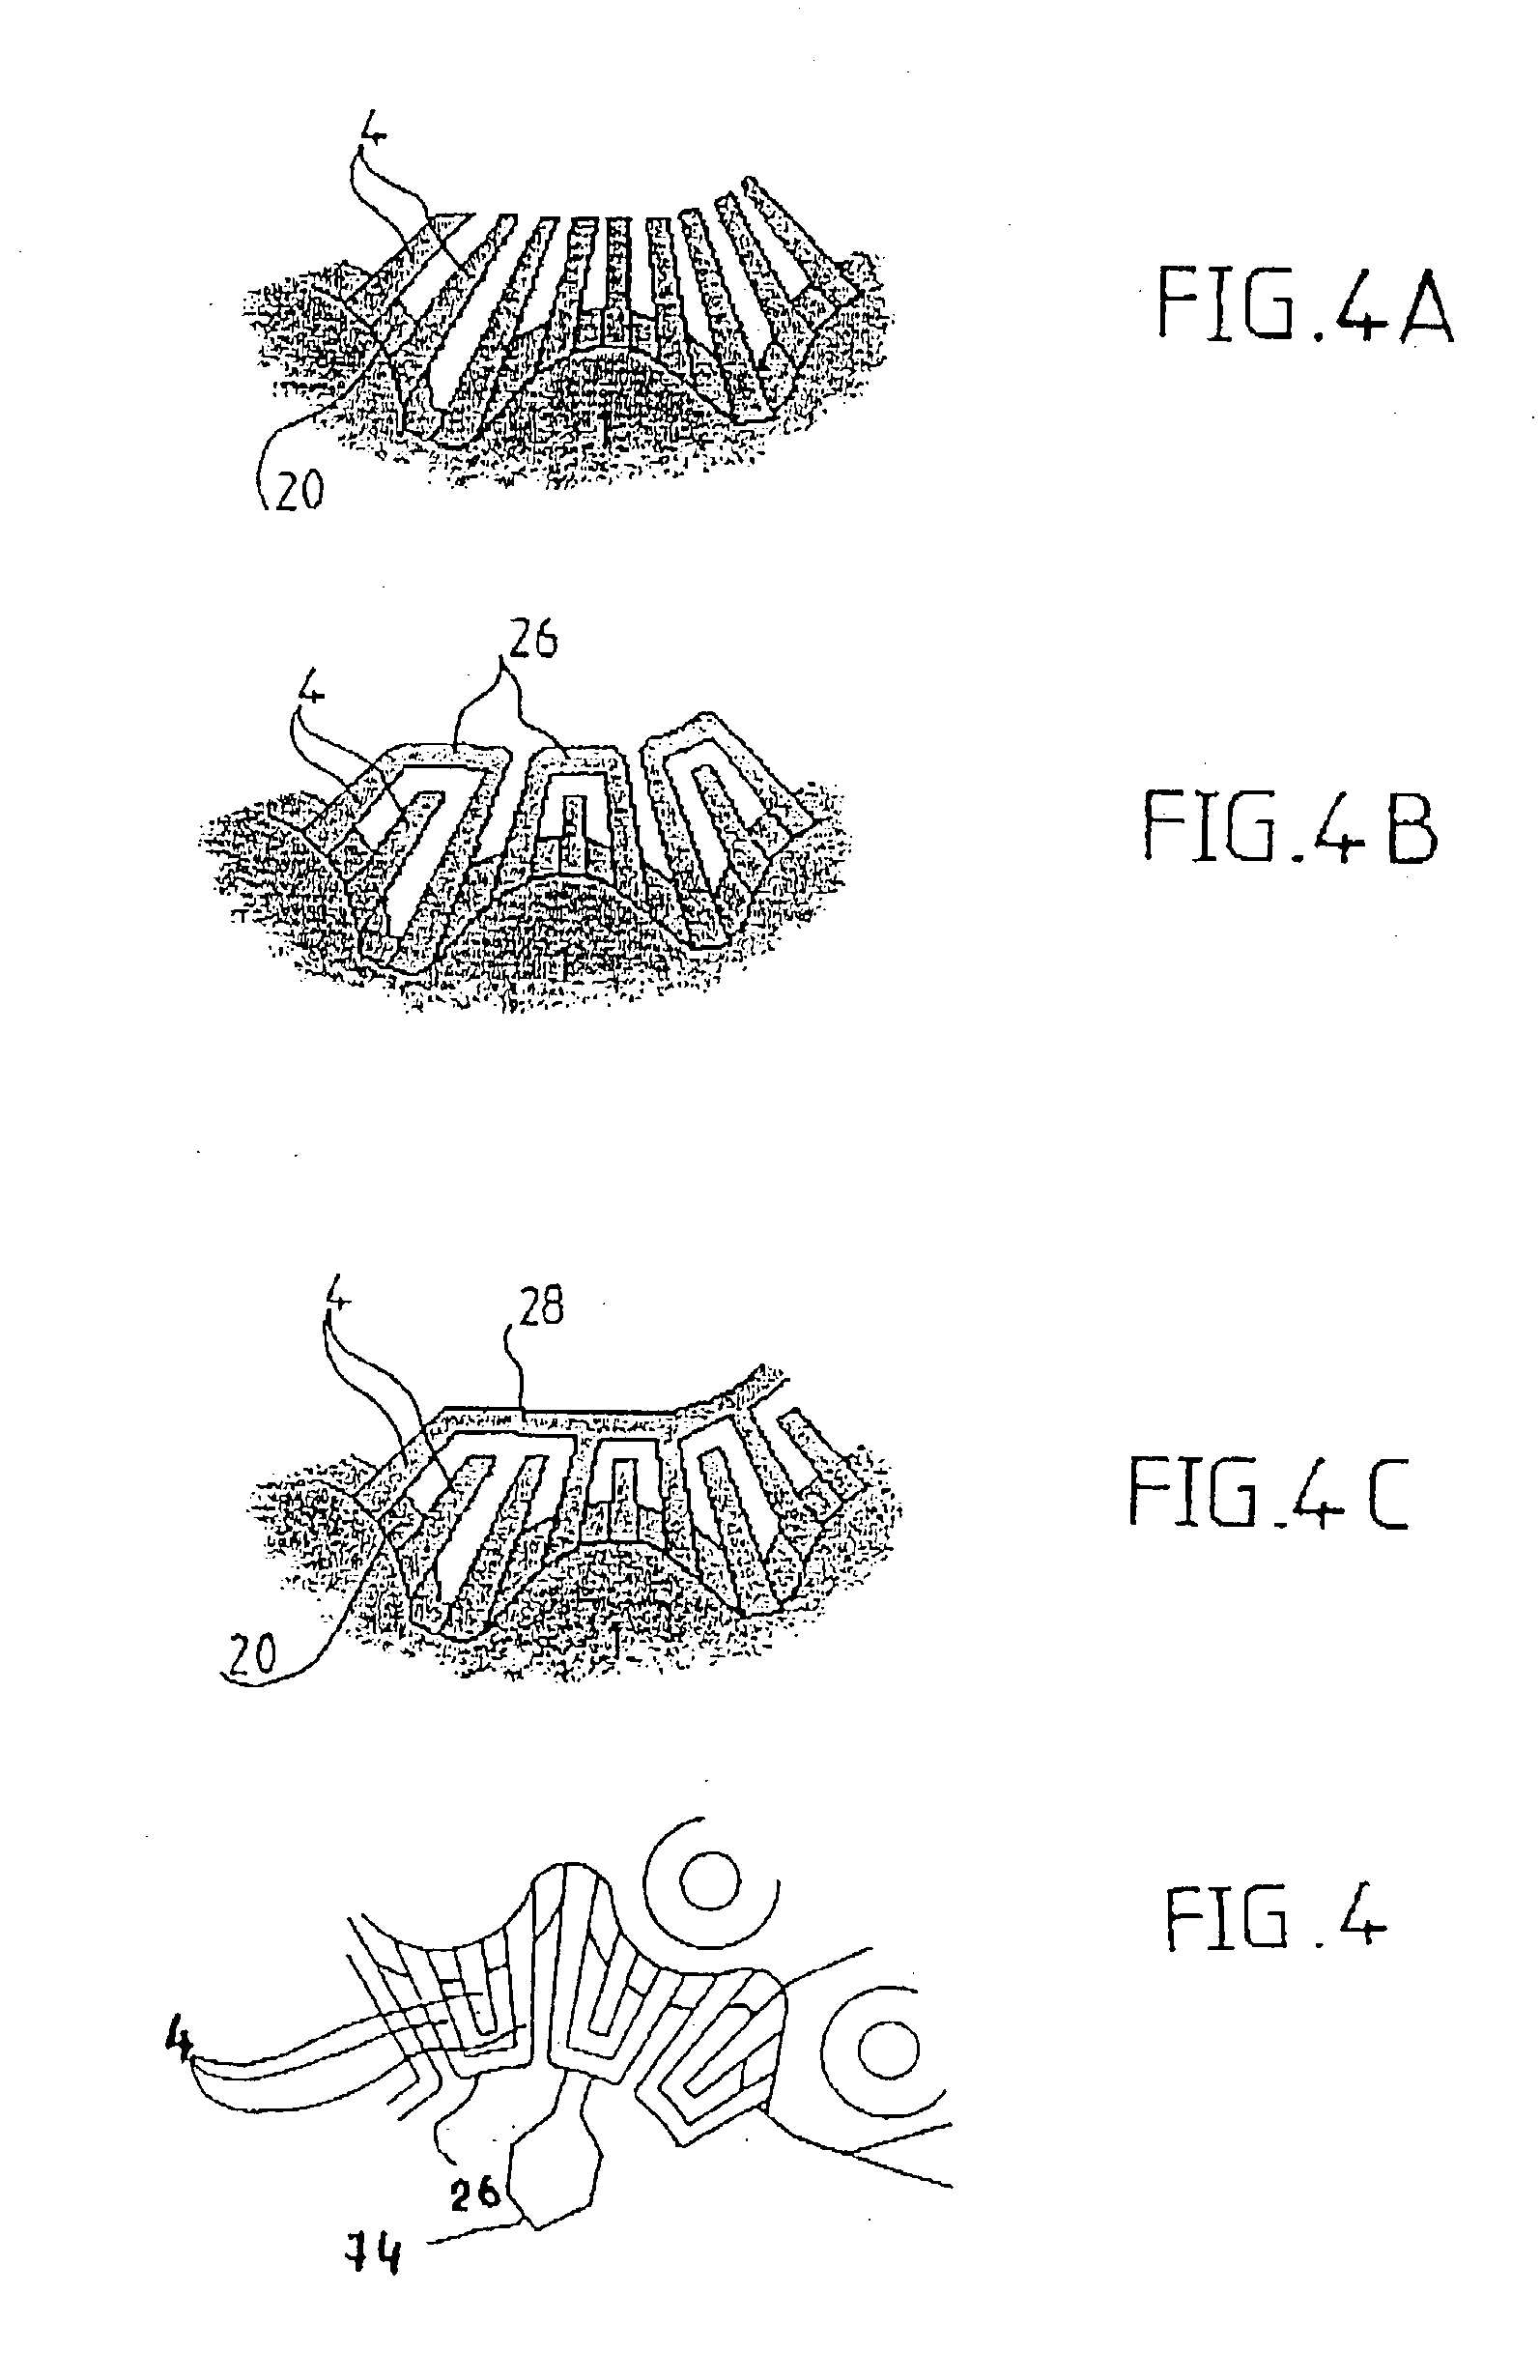 Current rectifier assembly for rotating electrical machines, in particular motor vehicle alternator